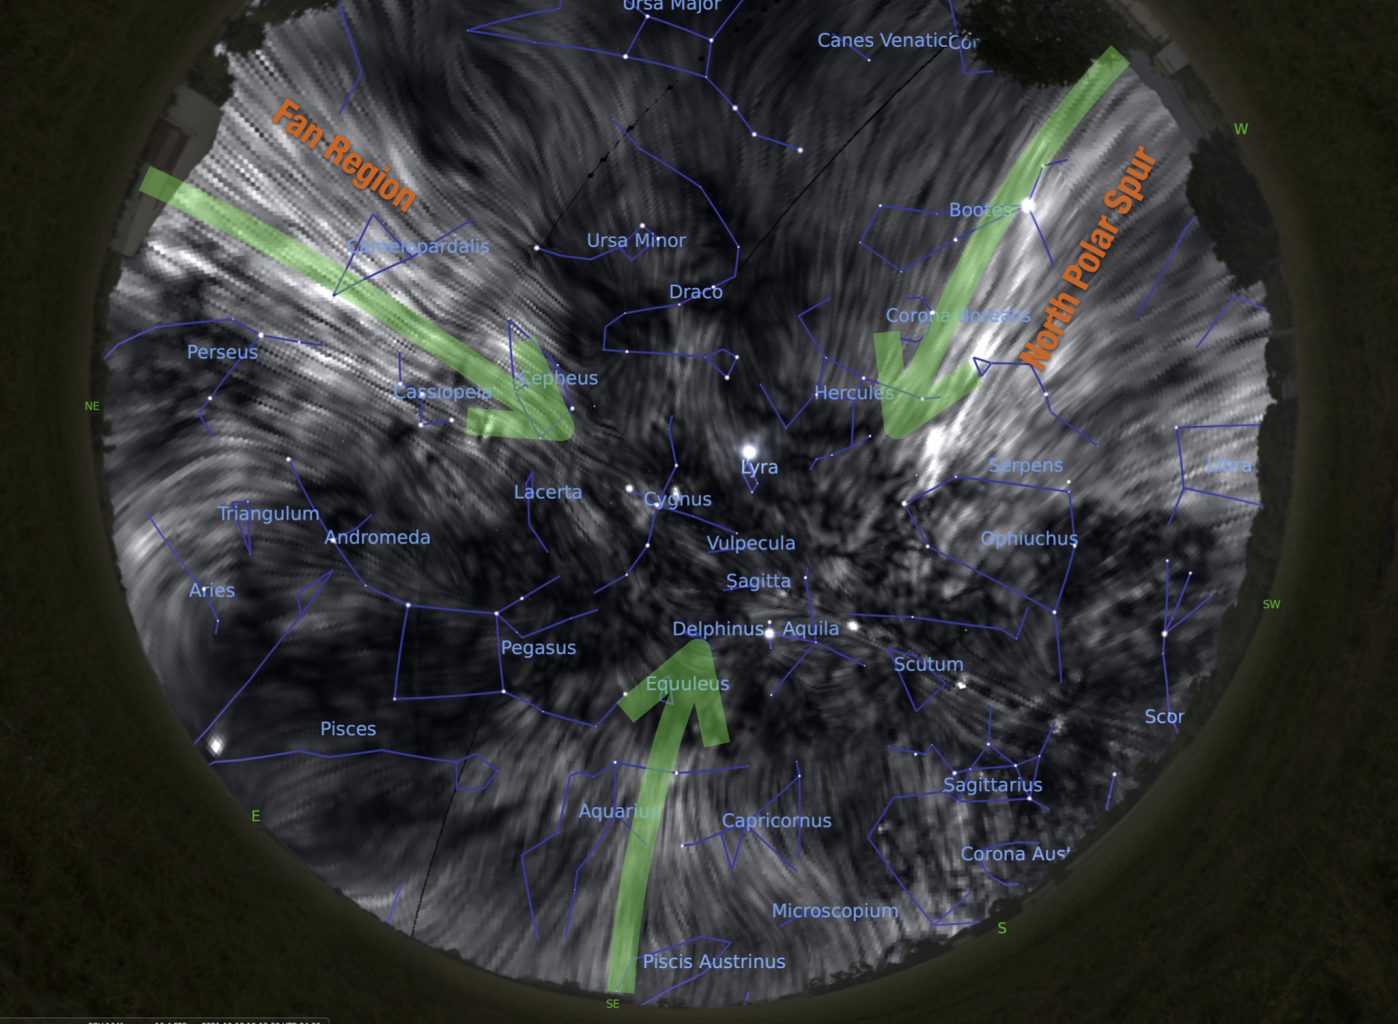 A view of the sky if we could see it in radio polarized waves. Credit: J. West